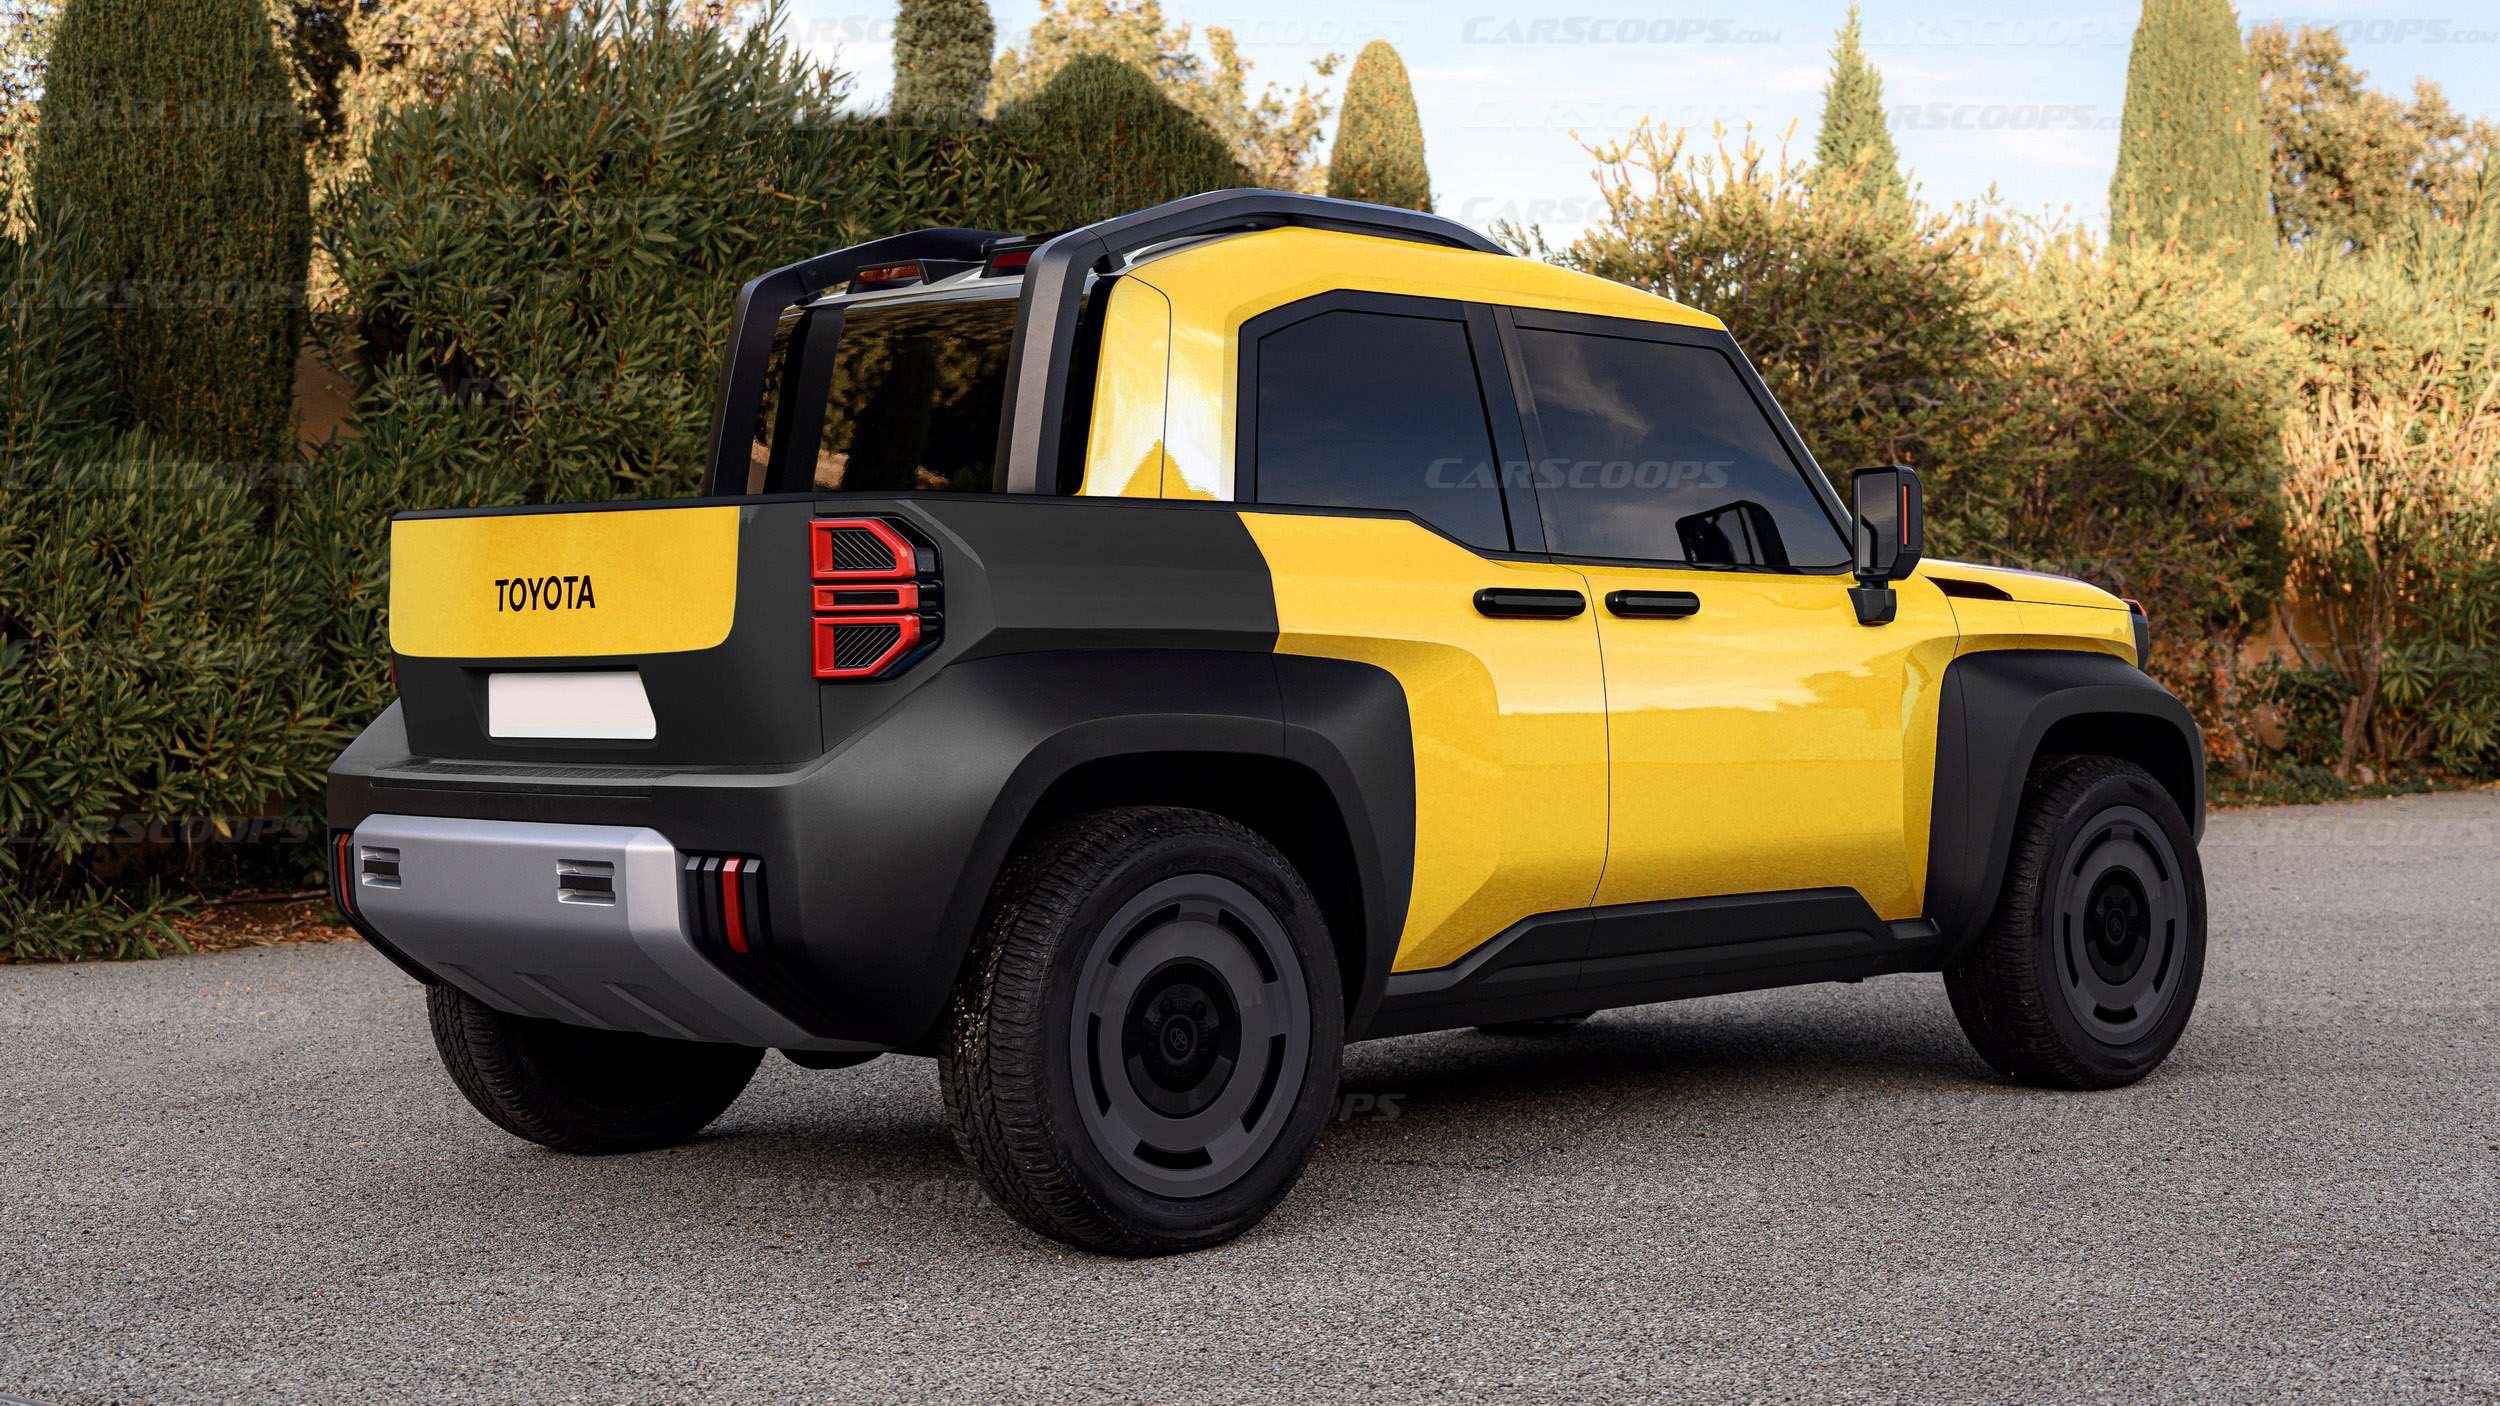 Toyota Compact Cruiser EV Looks Awesome In Pickup Form Carscoops